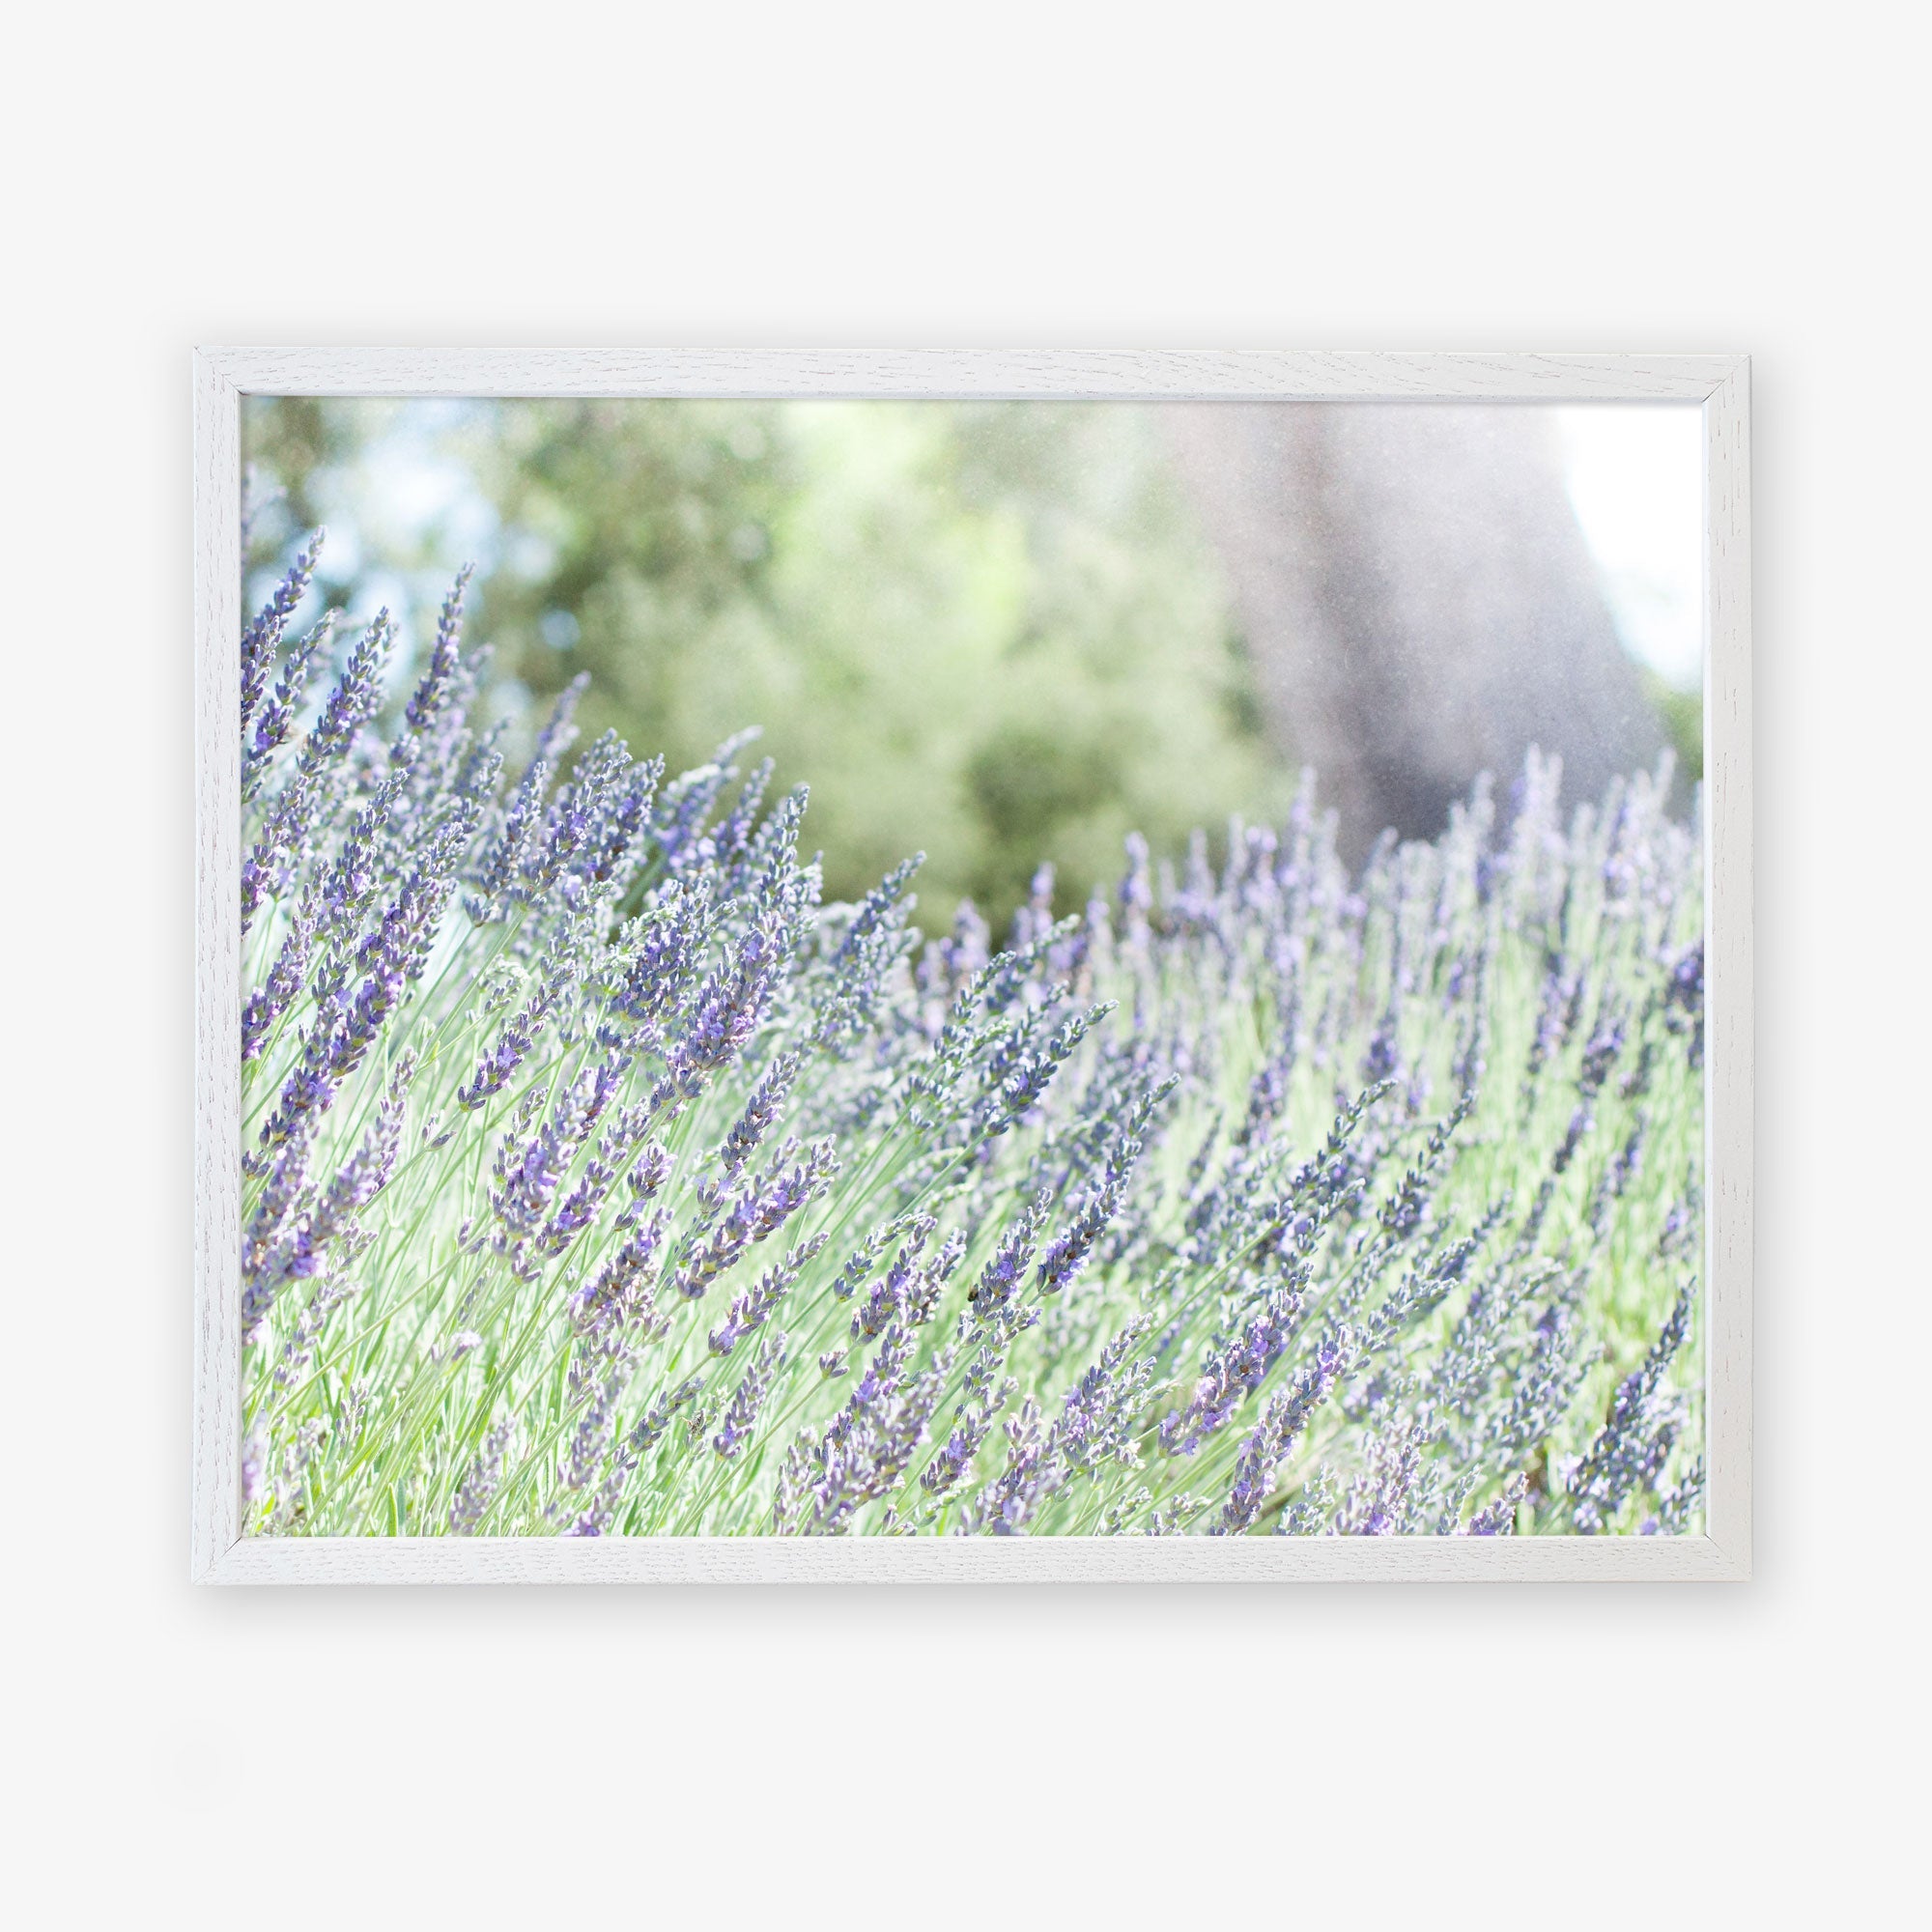 A framed photograph of a lush lavender field, with purple blossoms swaying gently. In the background, green trees and a blurred large tree trunk are visible, all set against a soft, light sky. The white frame contrasts with the vibrant colors of Offley Green&#39;s Rustic Floral Print, &#39;Fields of Lavender.&#39;